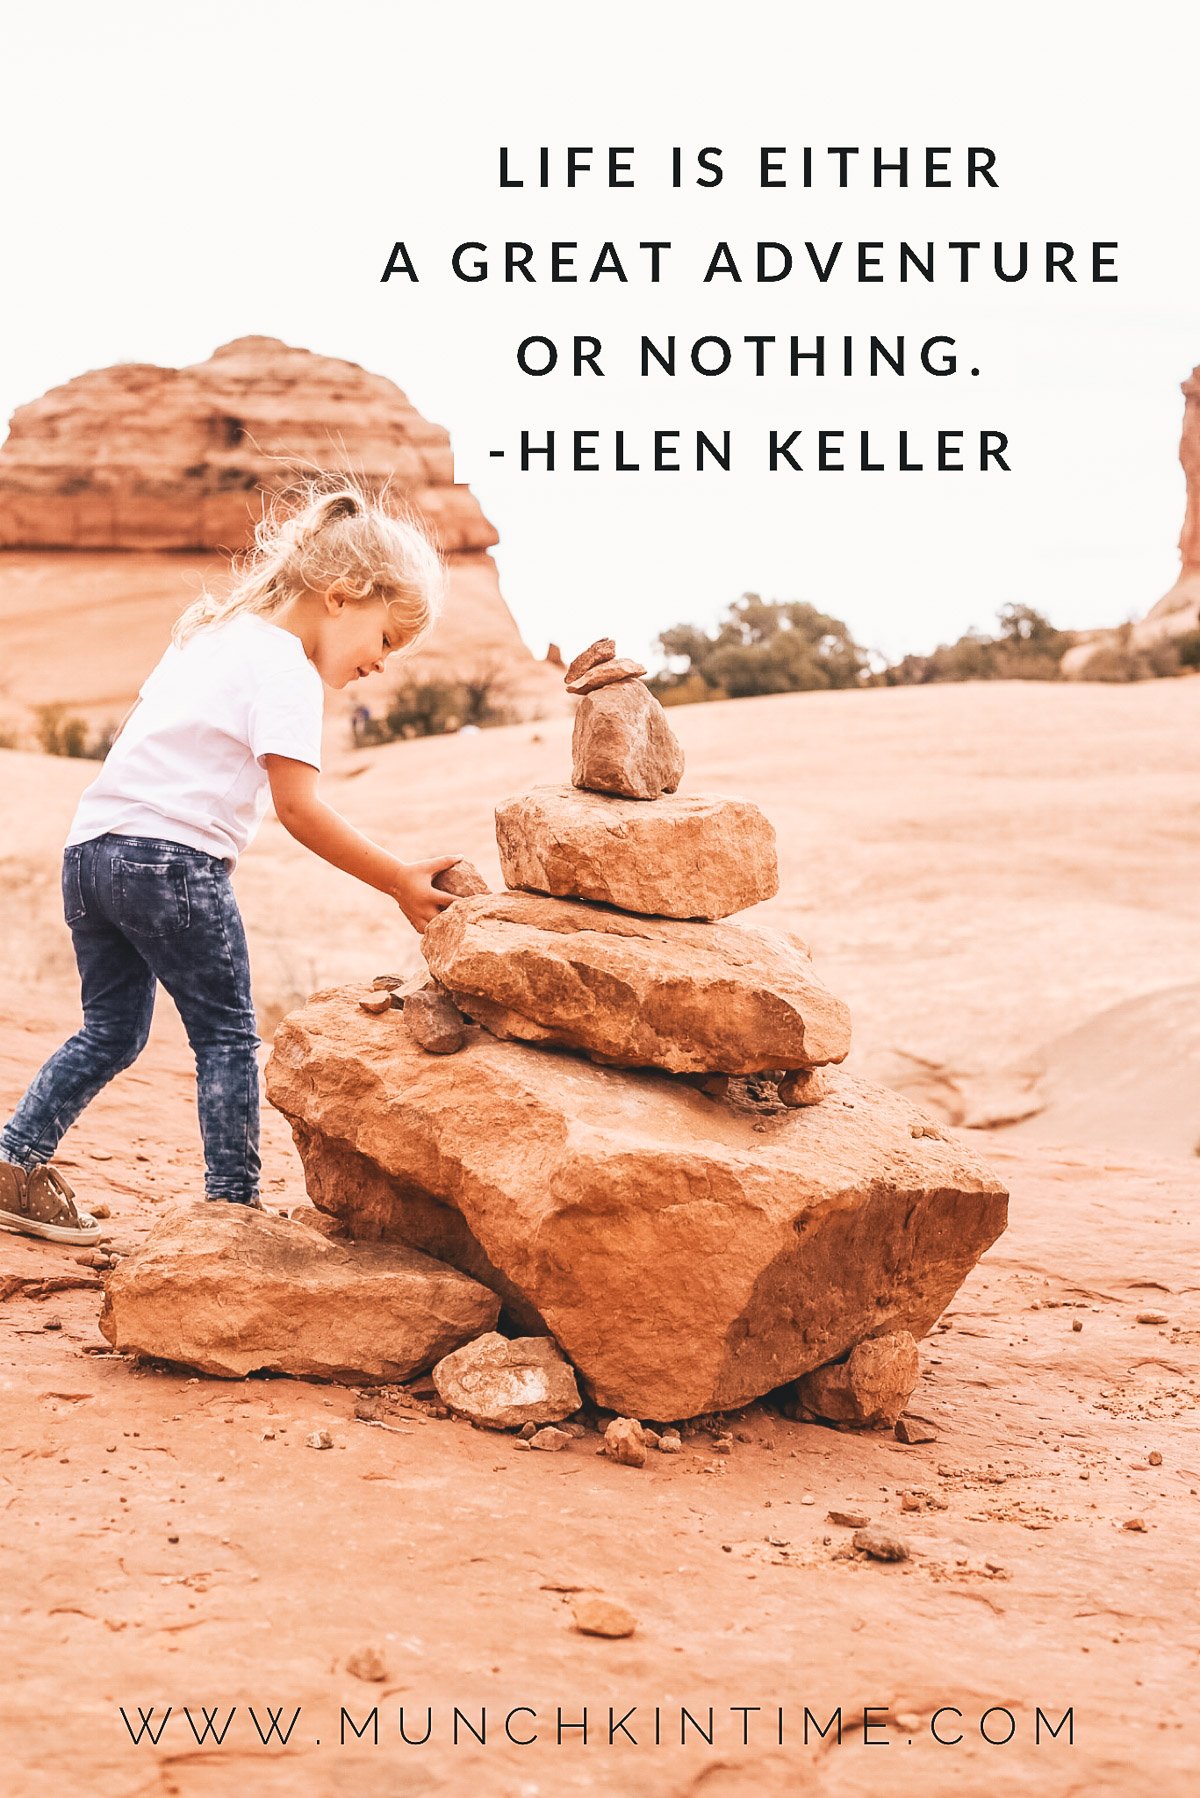 "Life is either a great adventure or nothing." - Helen Keller